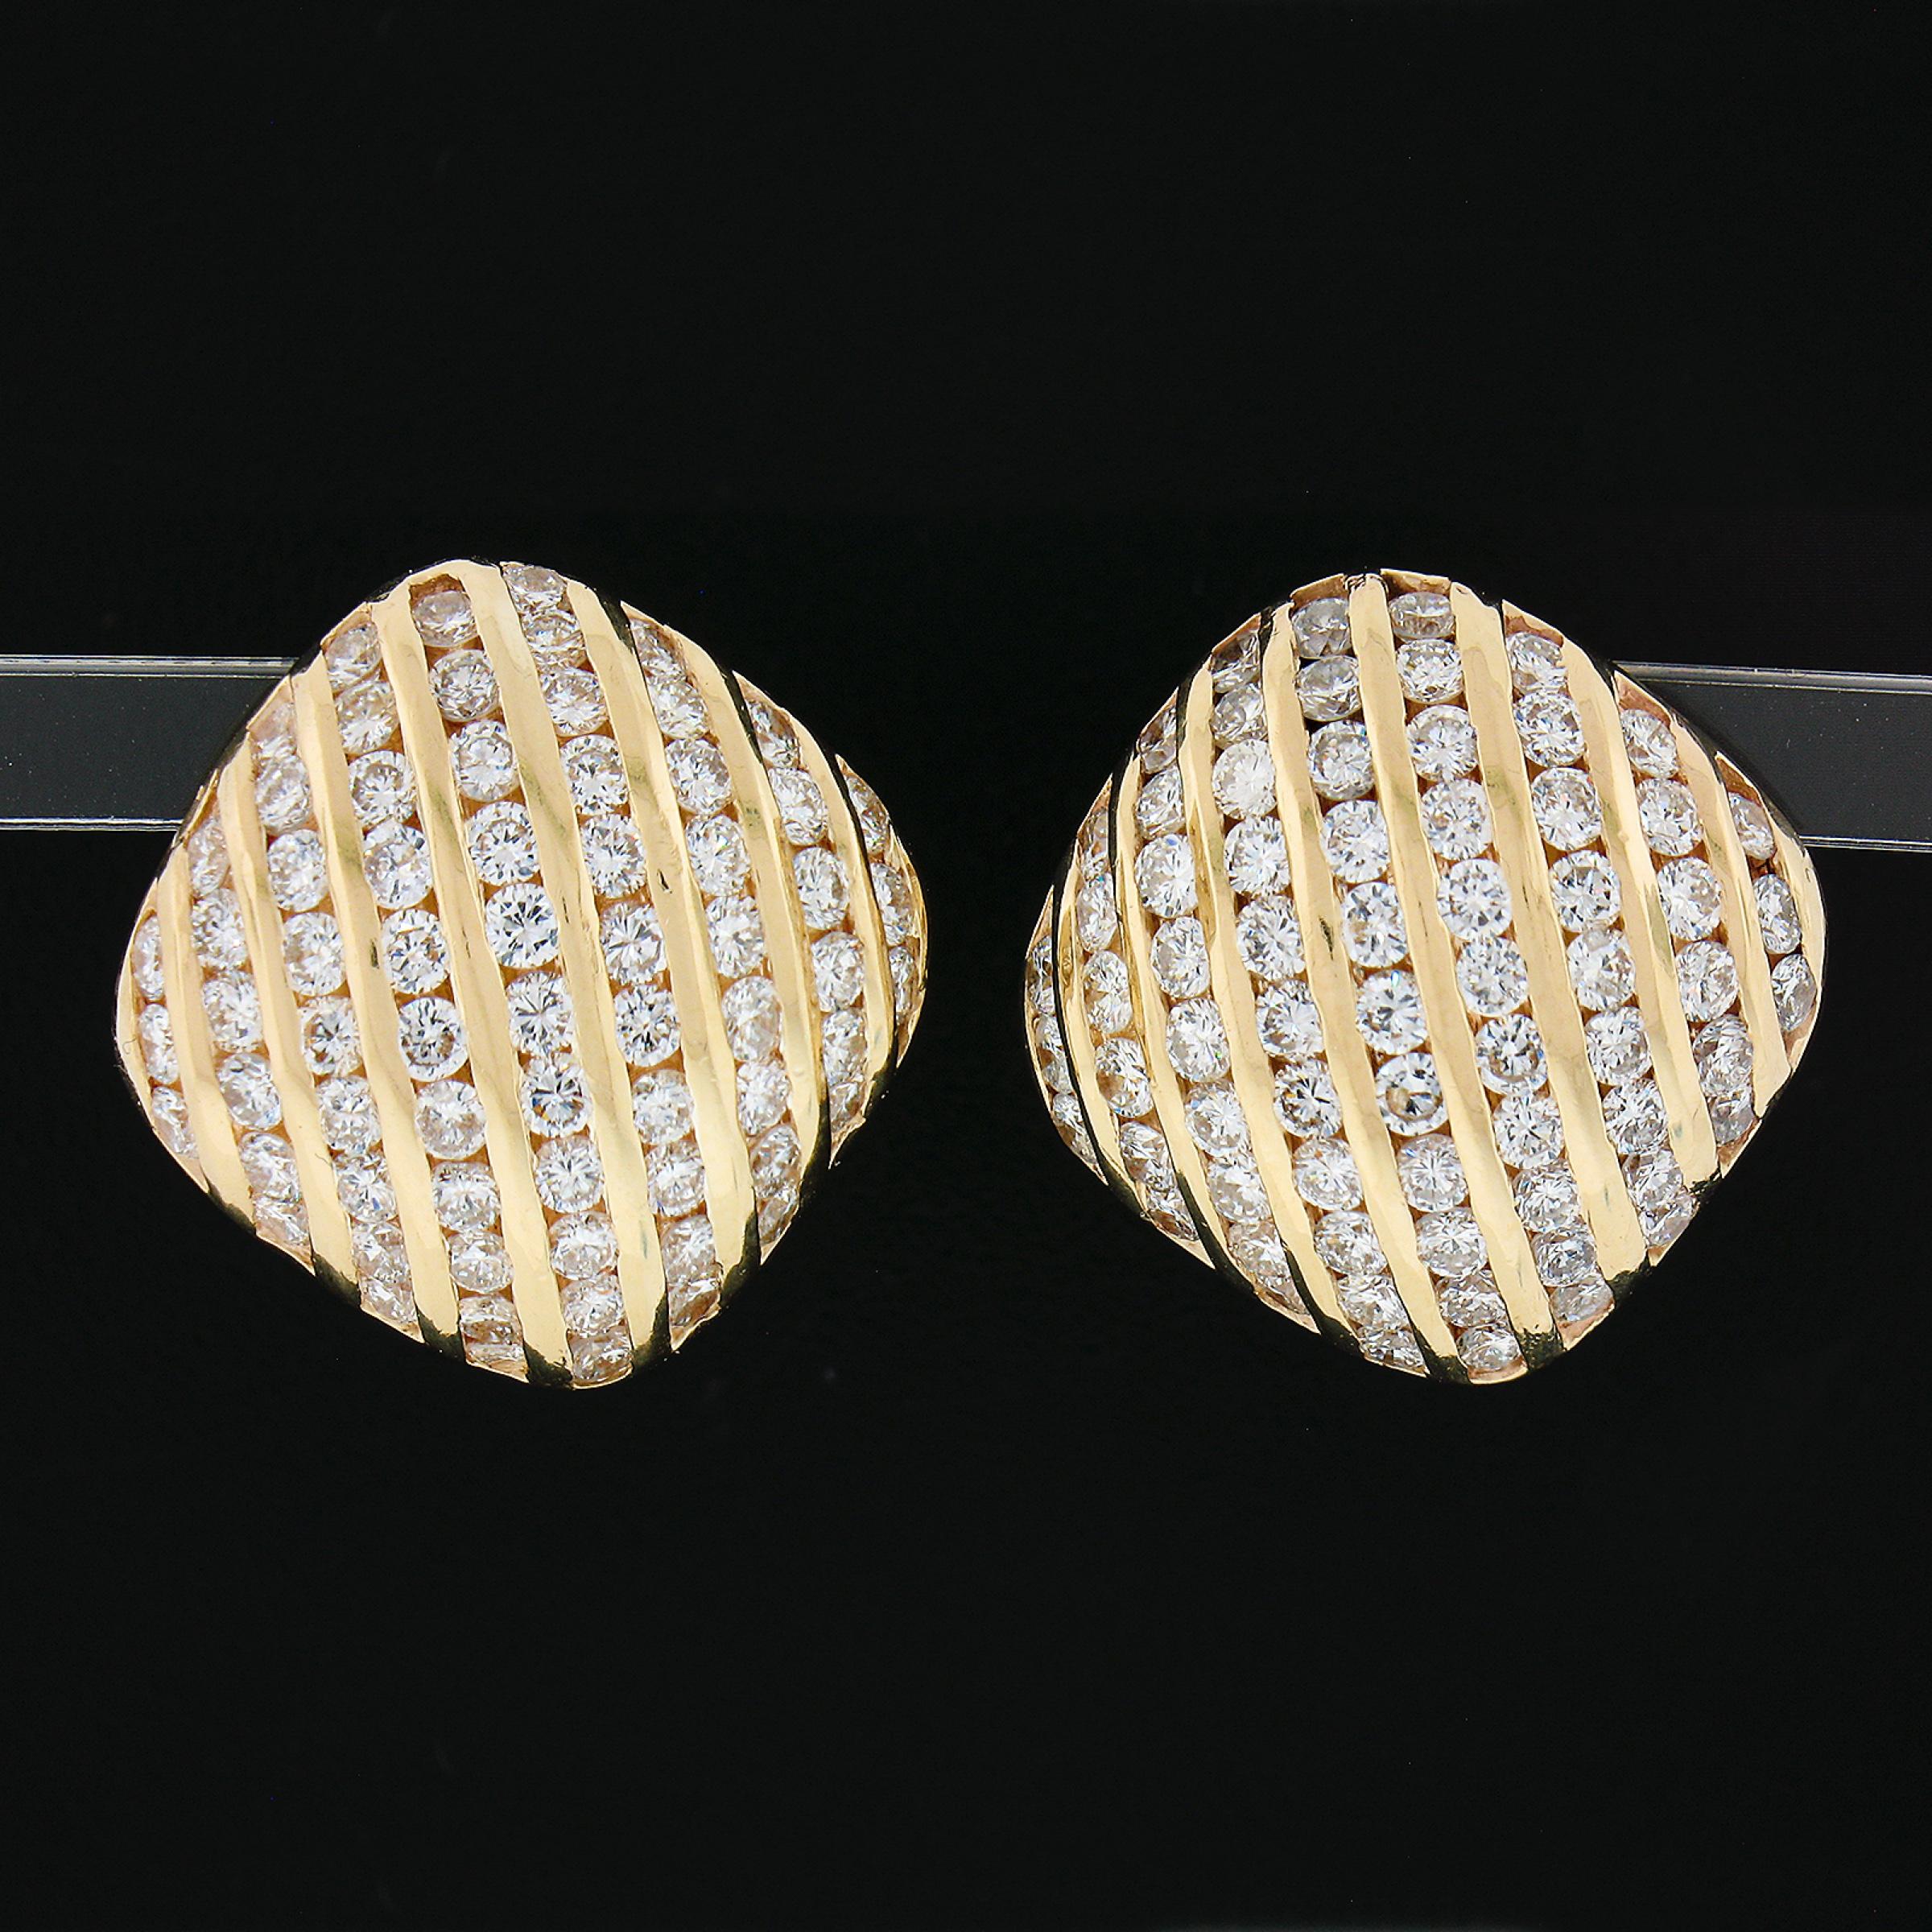 You are looking at a magnificent and very well made made pair of earrings that is crafted in solid 14k yellow gold. They feature a cushion shape button style that is completely drenched in very fine quality diamonds throughout. These round brilliant